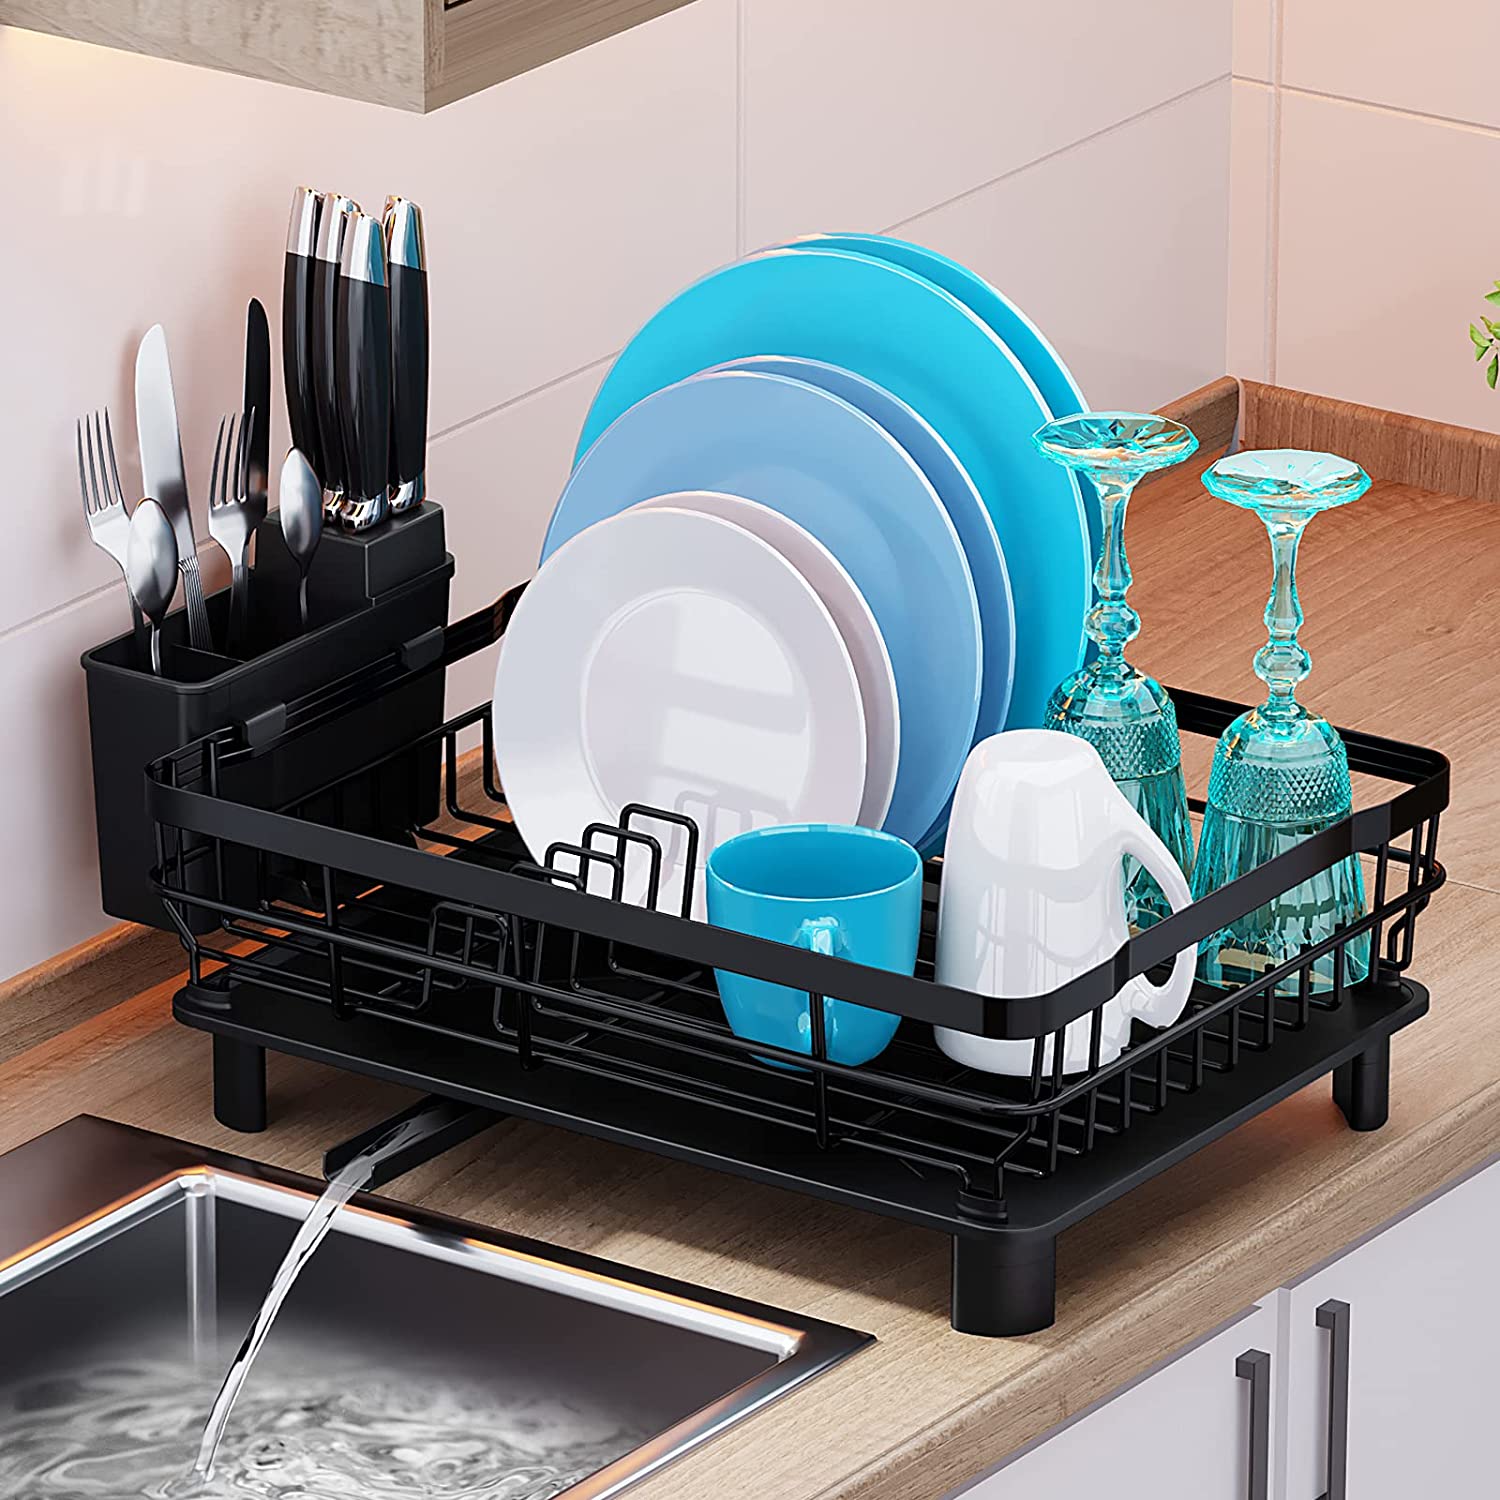 PXRACK Dish Drying Rack, Expandable(19.1-26.9) Large Capacity Dish Rack  and Drainboard Set, Stainless Steel Dish Drainers with Utensil Holder for